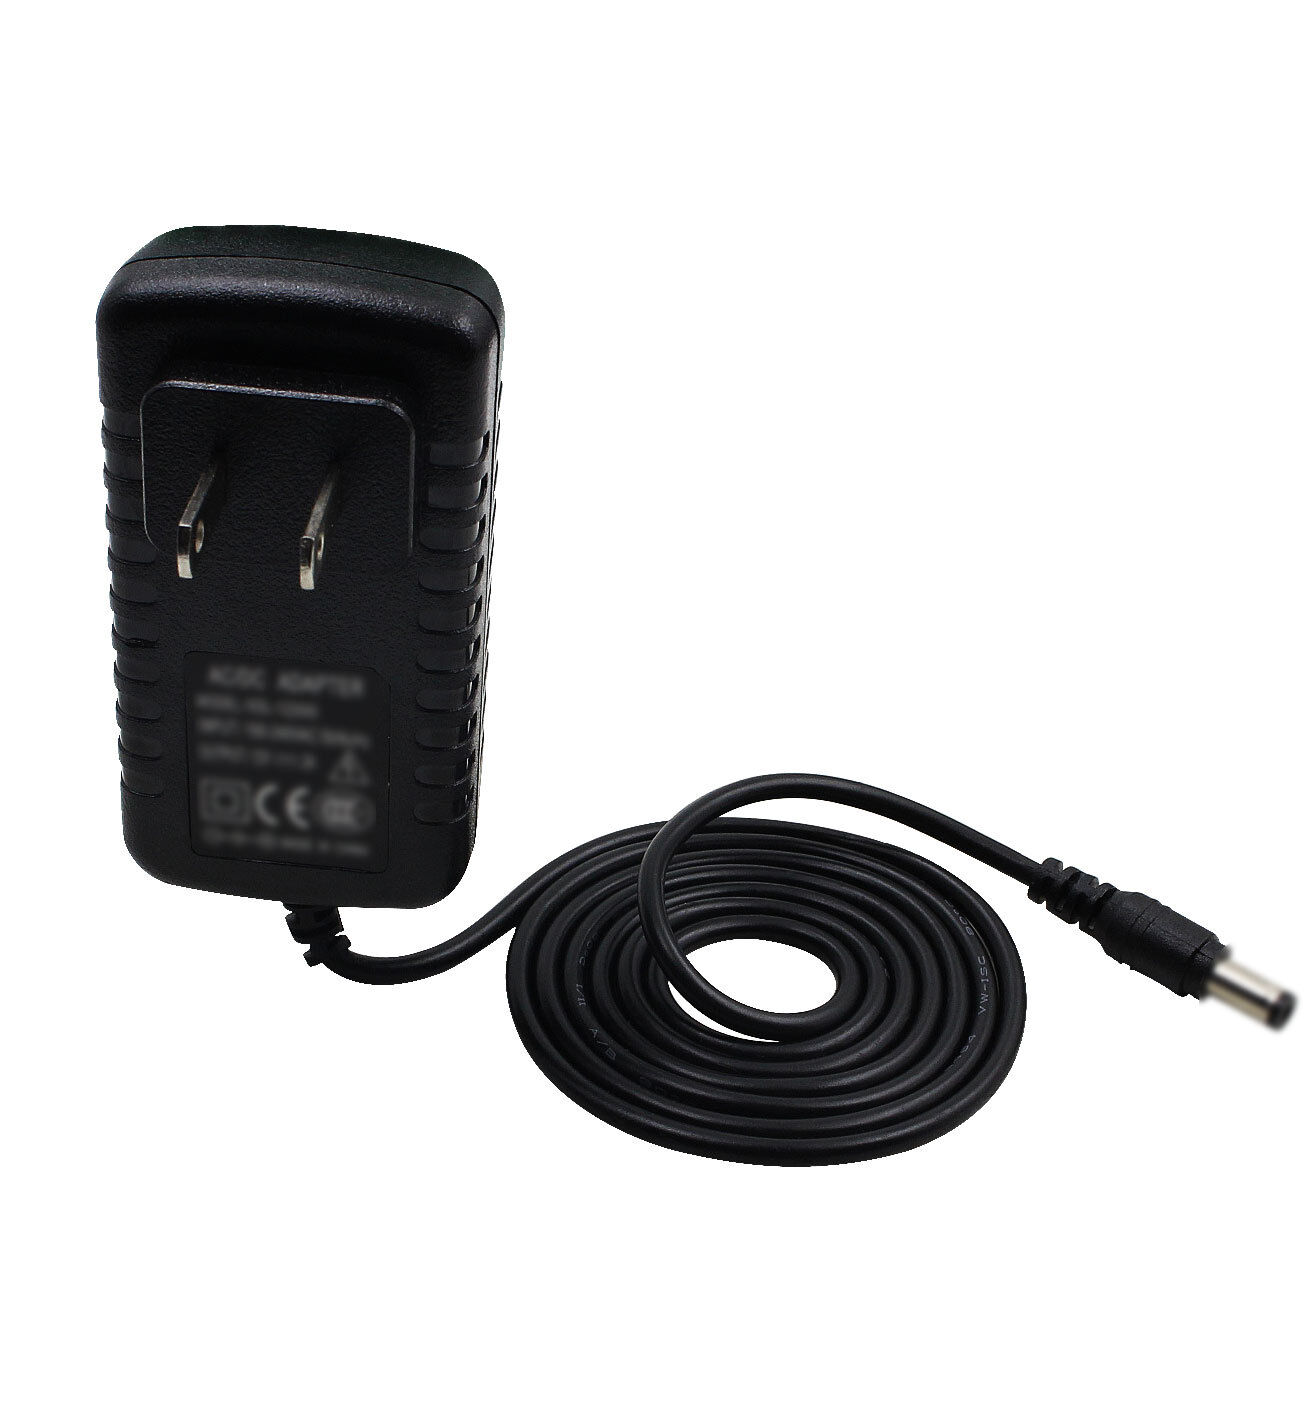 12V 2A AC Adapter For CS Model: CS-1202000 Wall Home Charger Power Supply Cord Brand Unbranded Color Black Compatibl